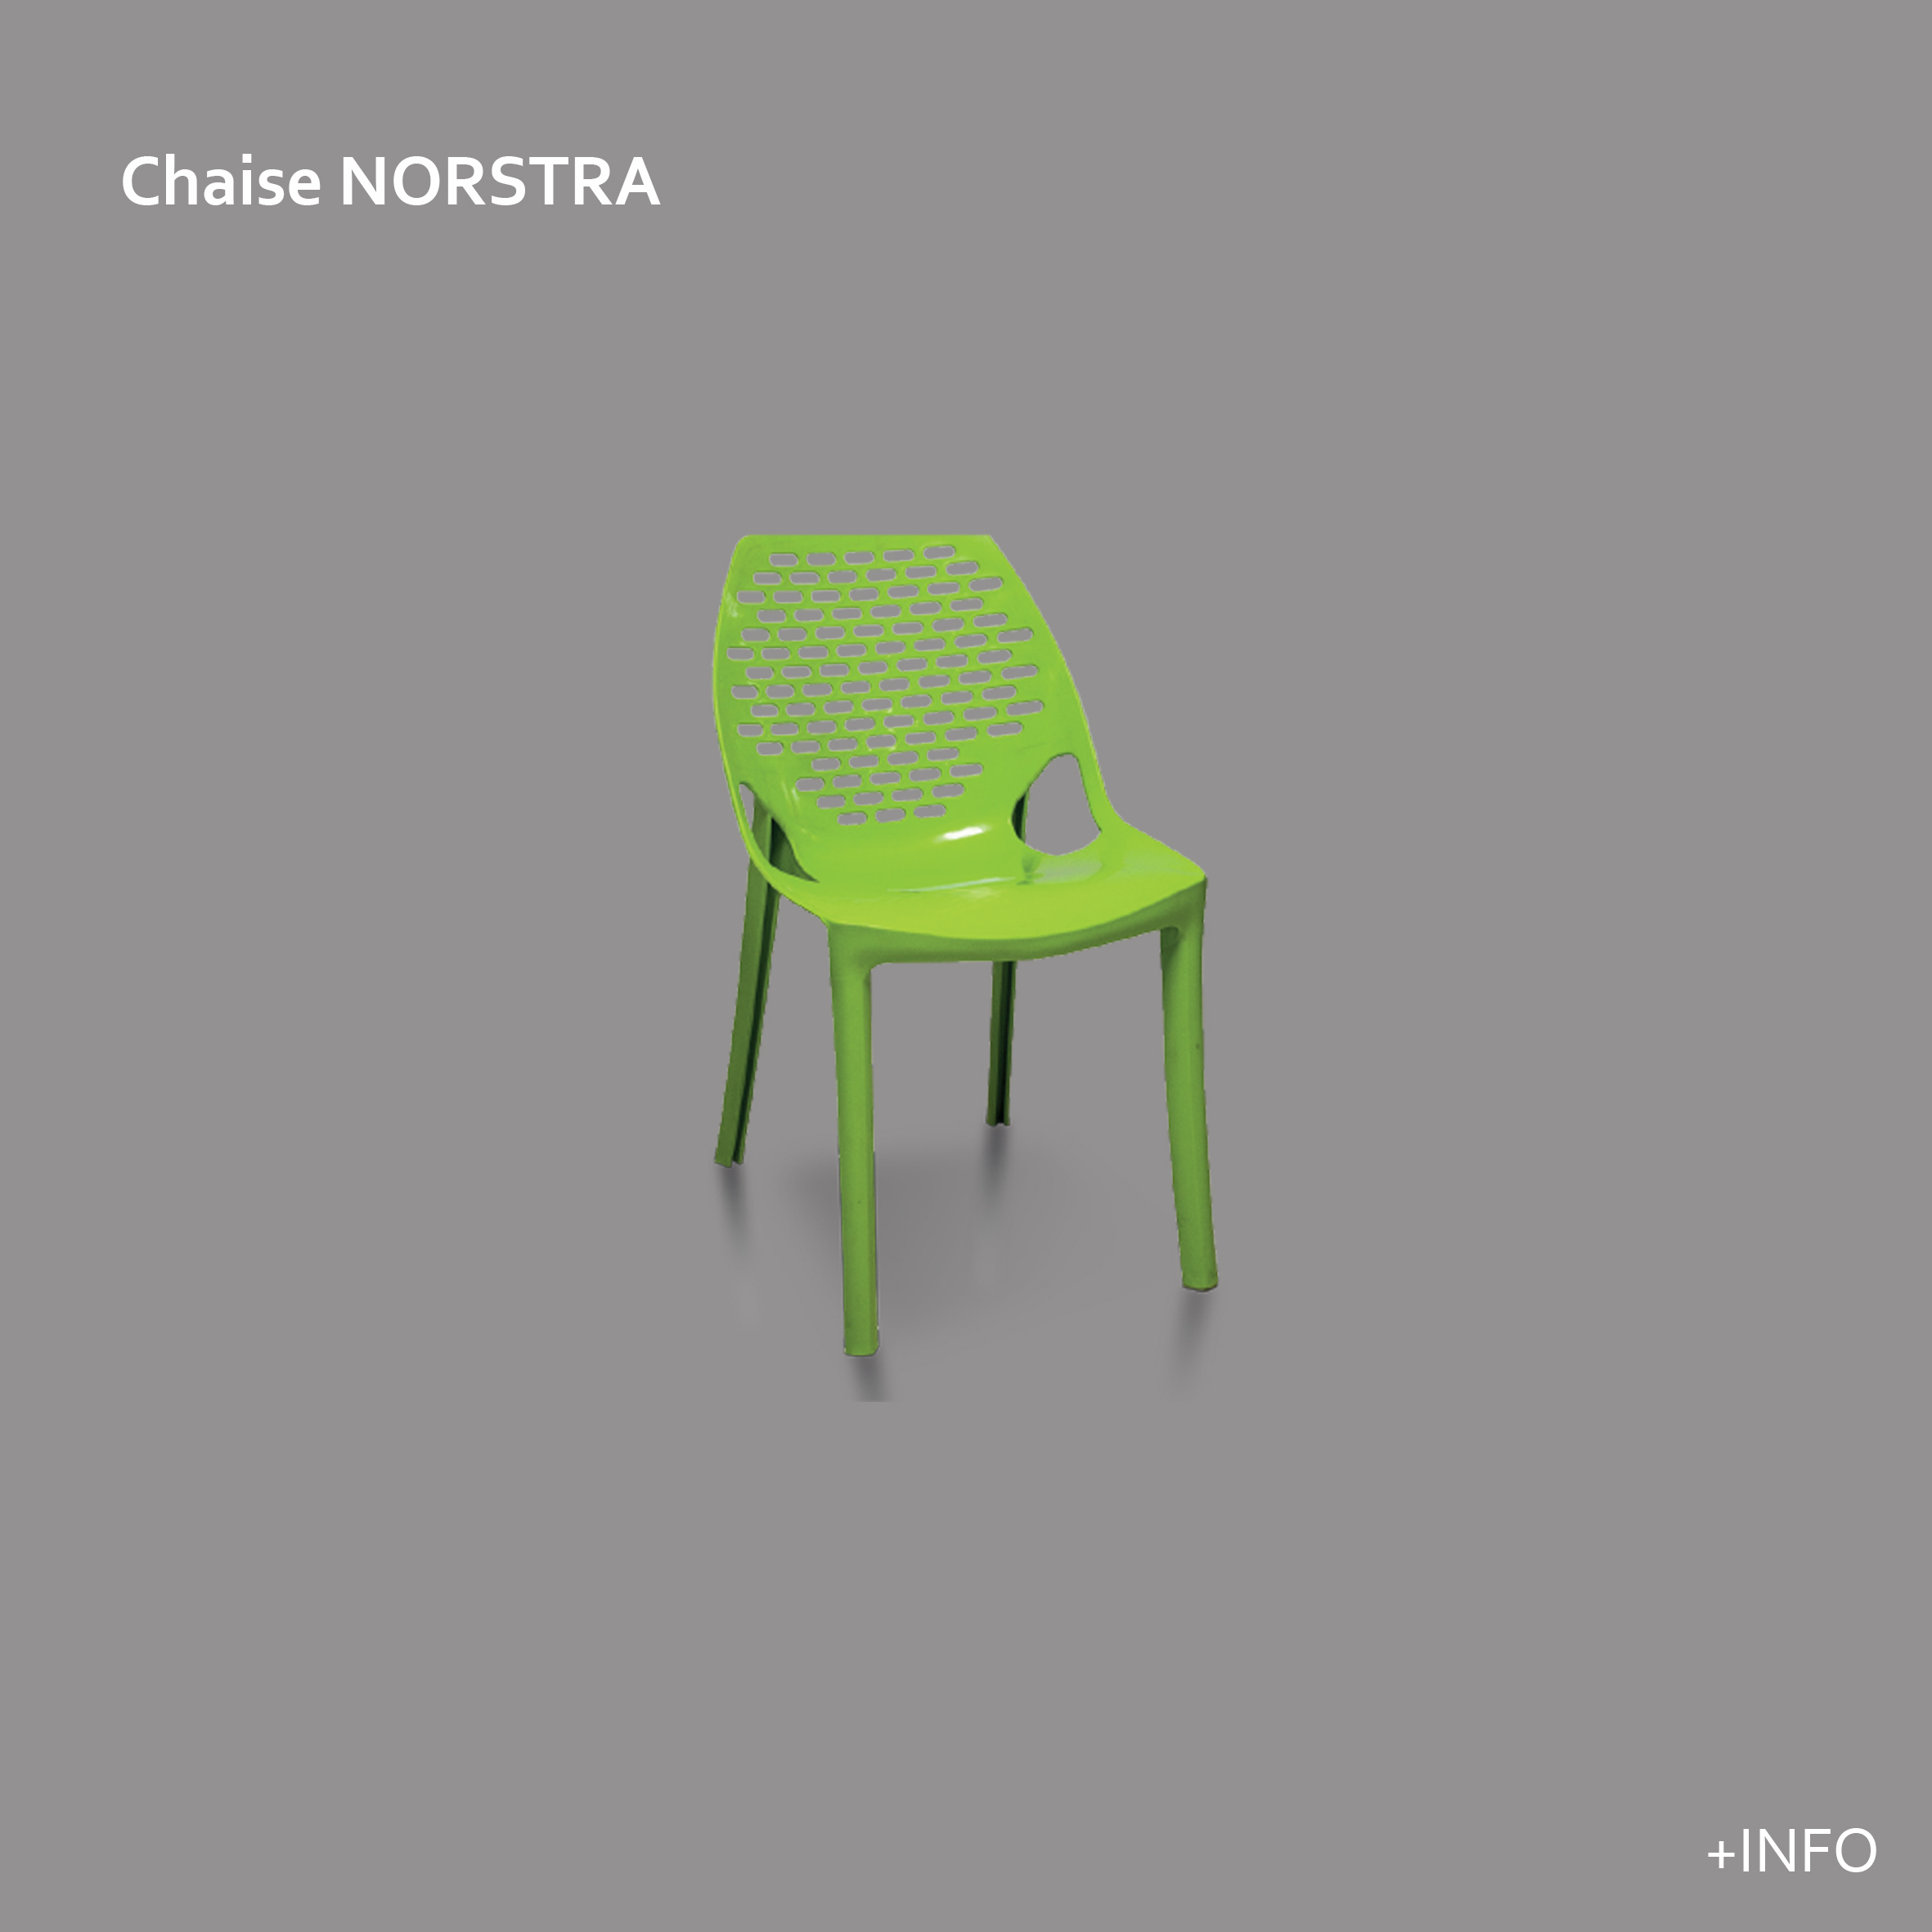 Nostra chaise